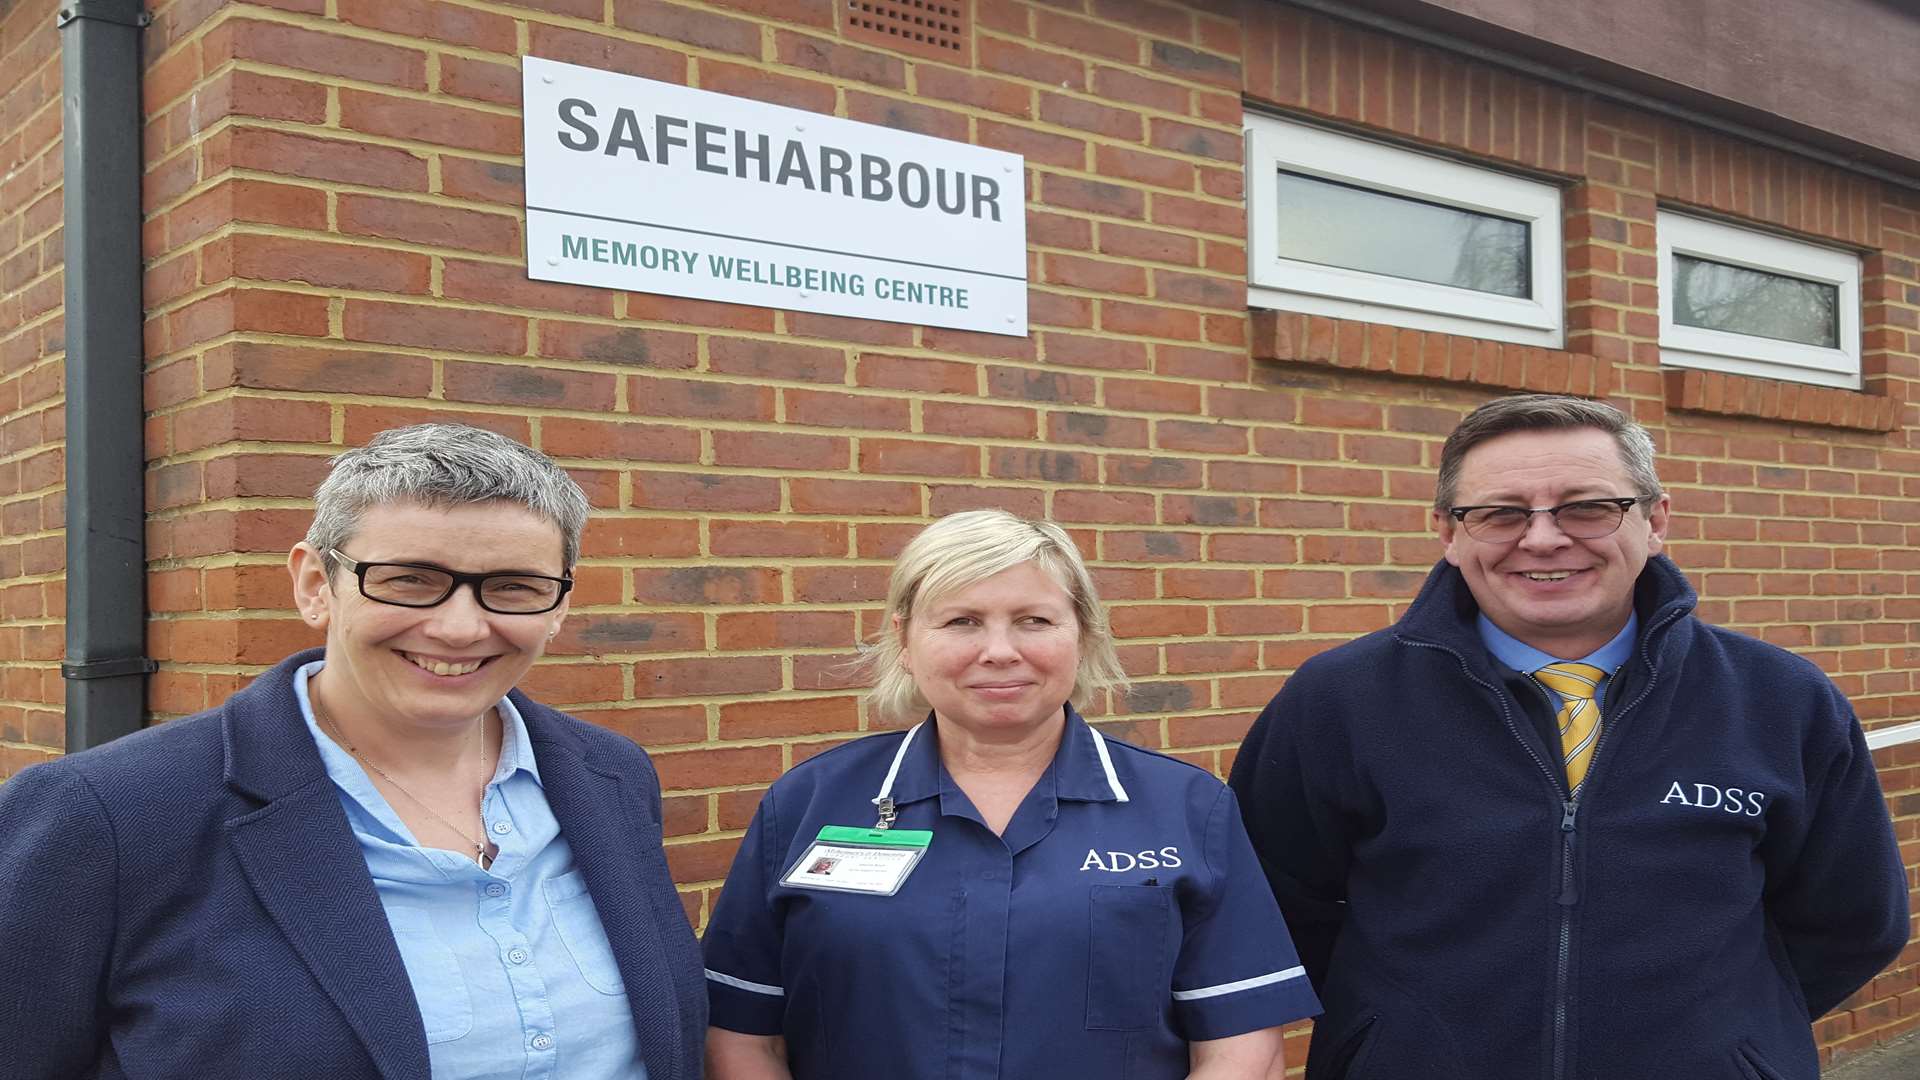 From left, CEO Liz Jewell, senior support worker Sherrie Boyd and service delivery coordinator Ross Mullis at the new Safeharbour Memory Wellbeing Centre